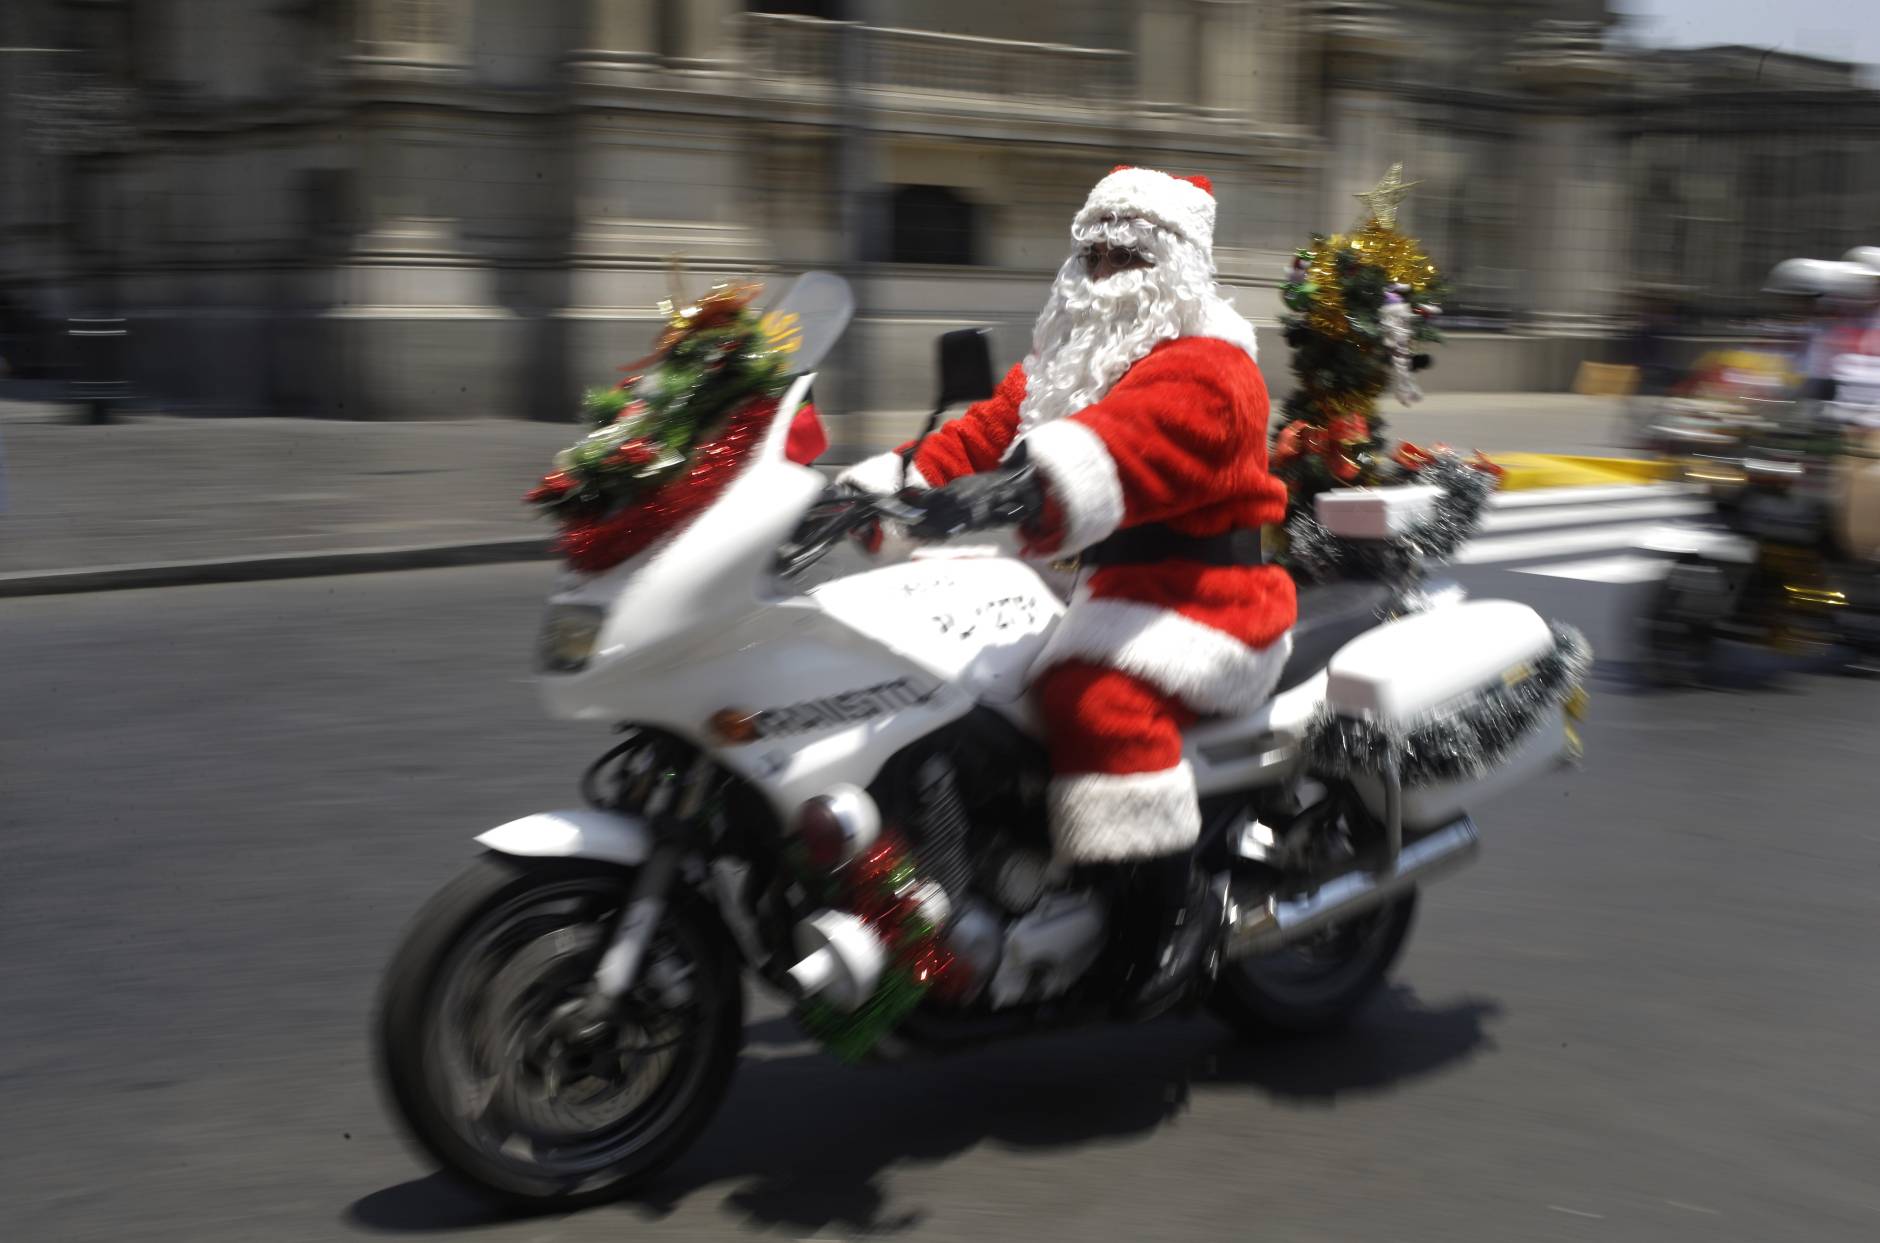 Traffic police officer Marco Chira, dressed in a Santa Claus costime, rides his motorcycle outside the government palace in downtown Lima, Peru, Tuesday, Dec. 20, 2016. The capital's traffic cops dressing as Santa and his helpers is an annual holiday ritual for the police department. (AP Photo/Martin Mejia)